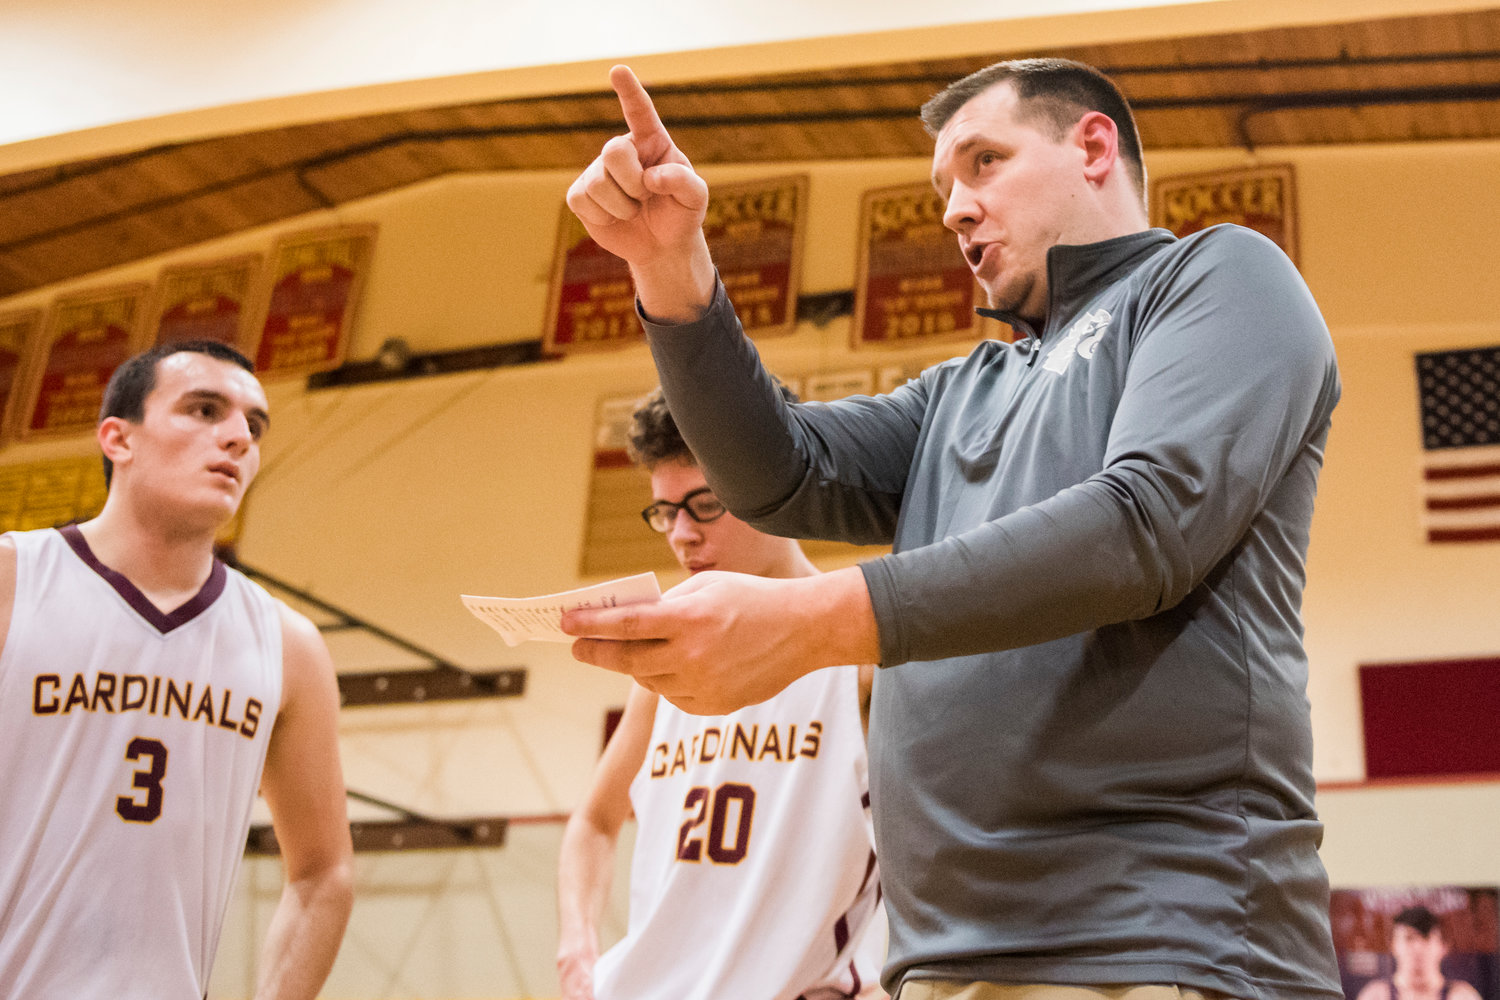 Former Winlock coach Nick Bamer talks to players during a game against Hoquiam during the 2019-20 season. Bamer took over as Tenino’s athletic director in July.